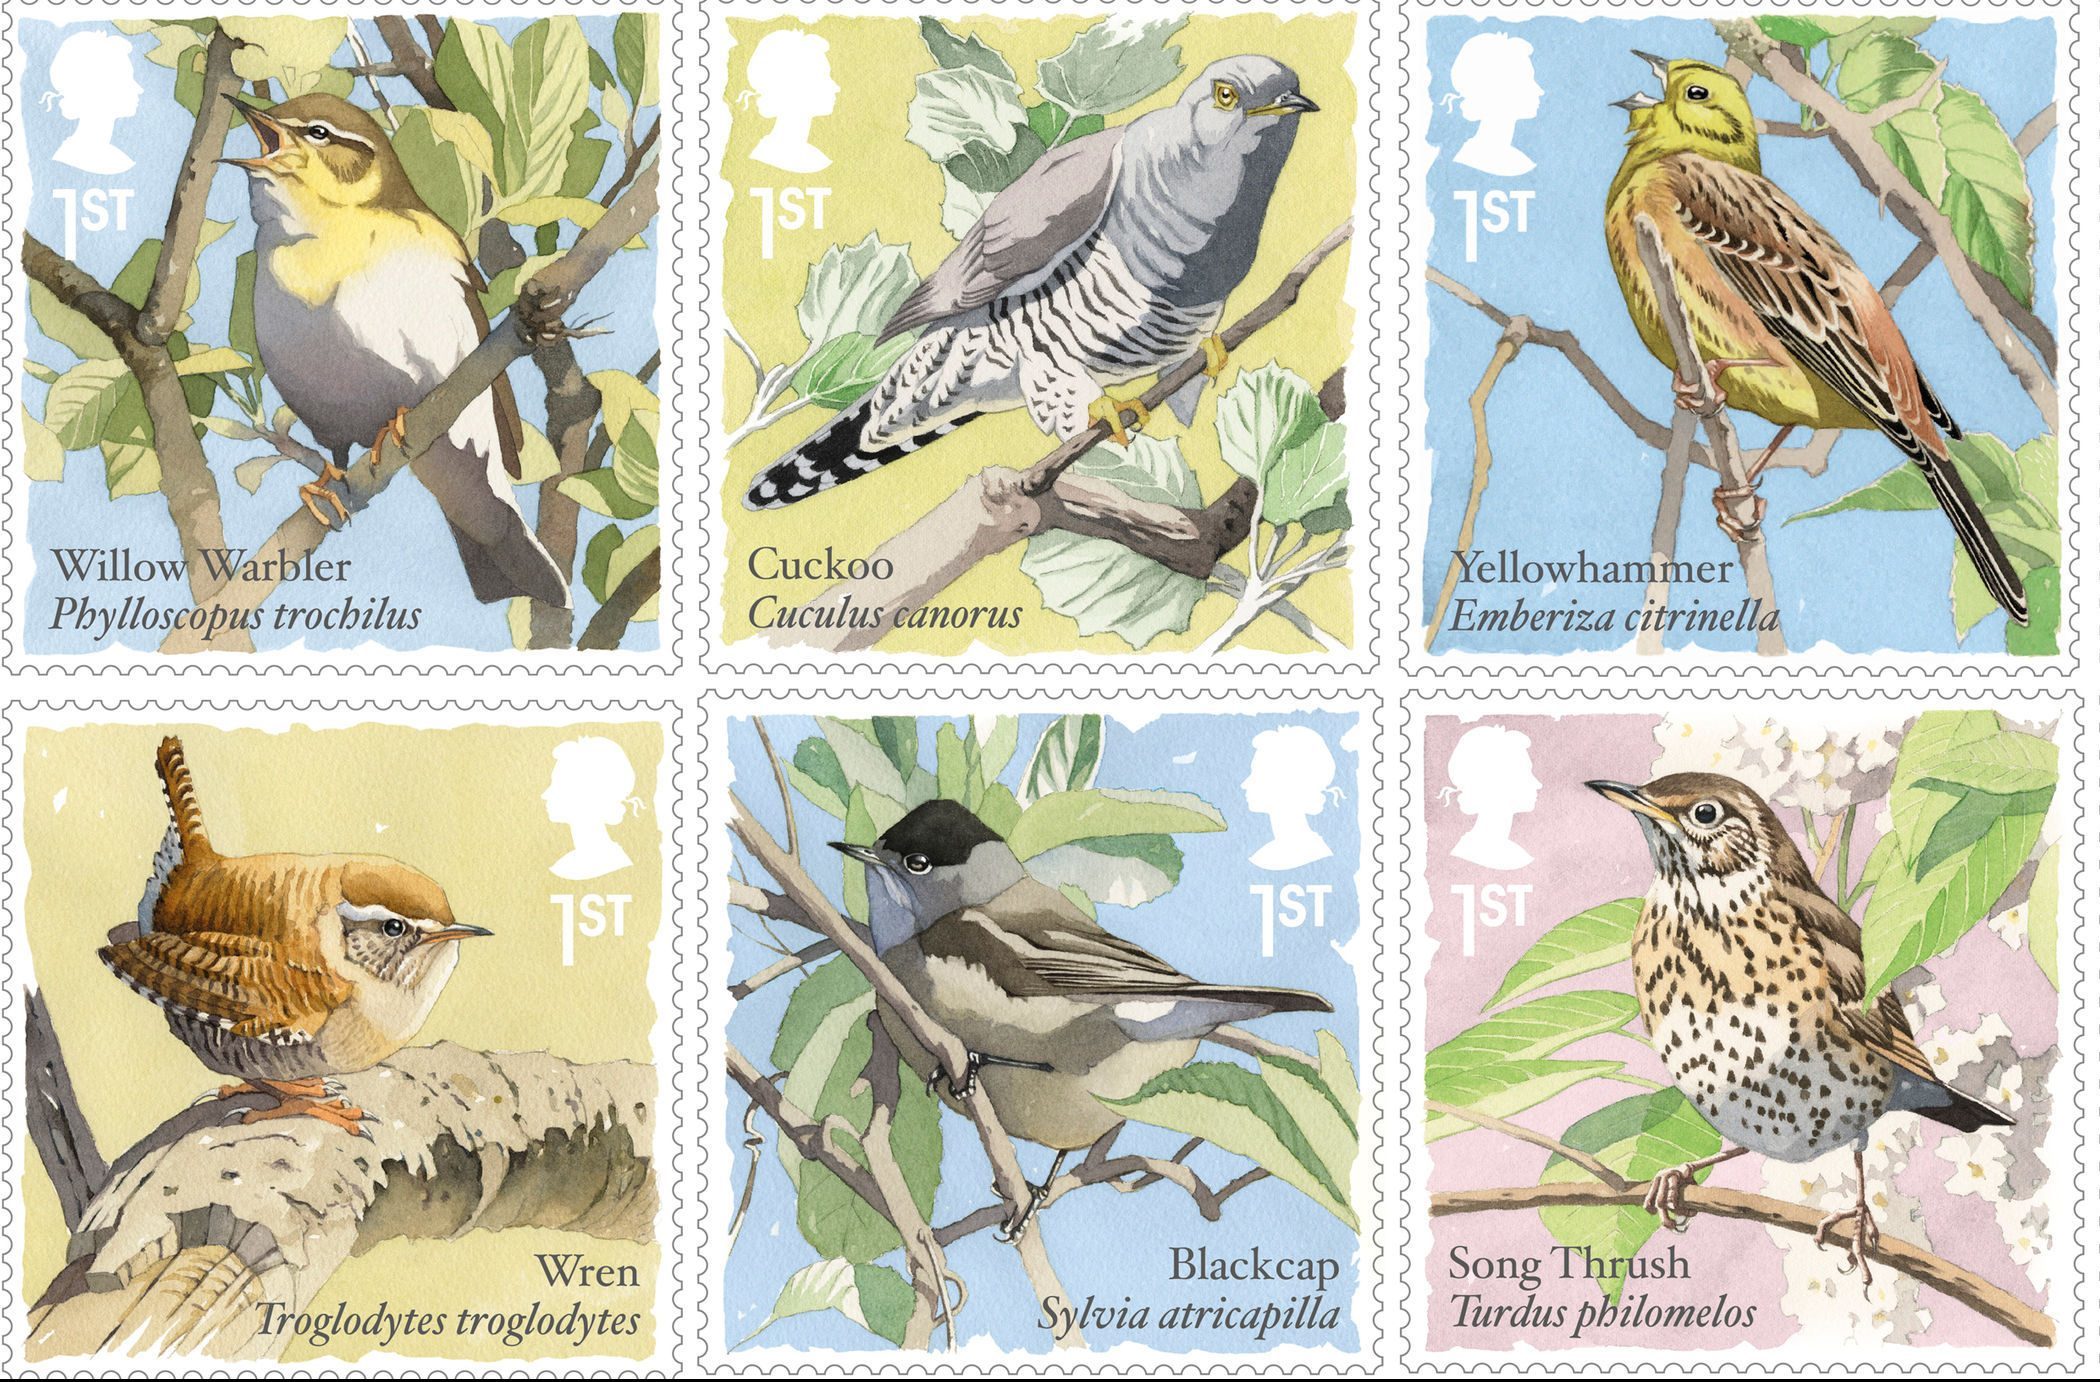 The stamps explore some familiar and less well-known varieties of songbirds, to mark International Dawn Chorus Day (Royal Mail/PA Wire)